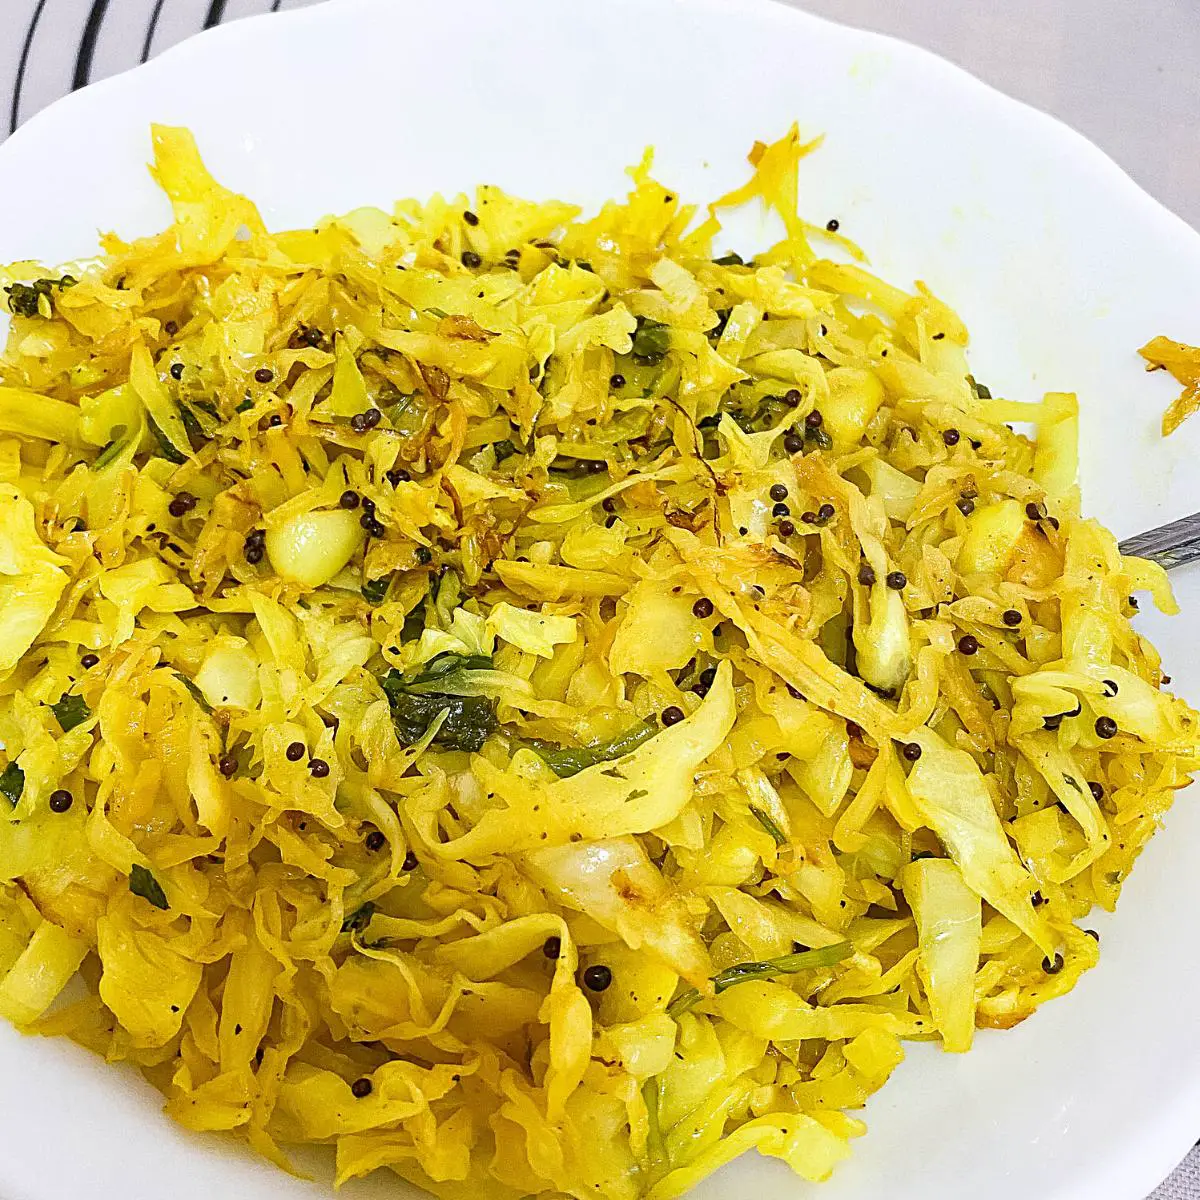 Sauteed cabbage in a bowl.